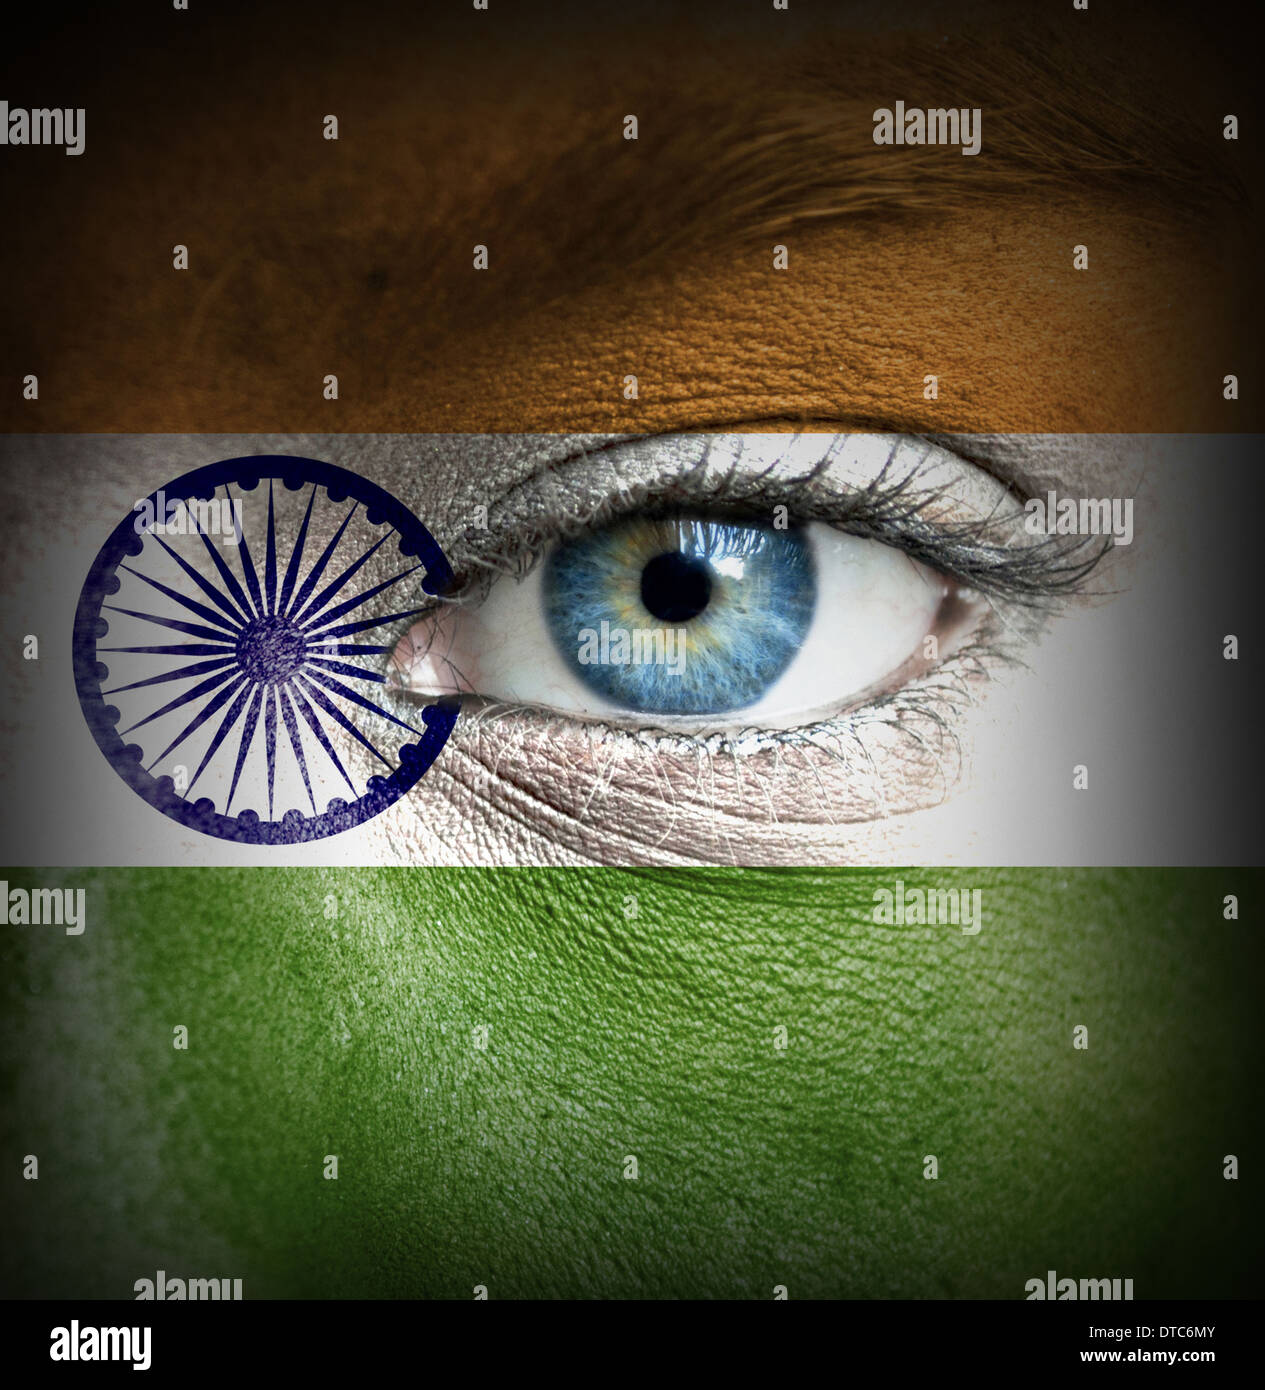 Human face painted with flag of India Stock Photo - Alamy